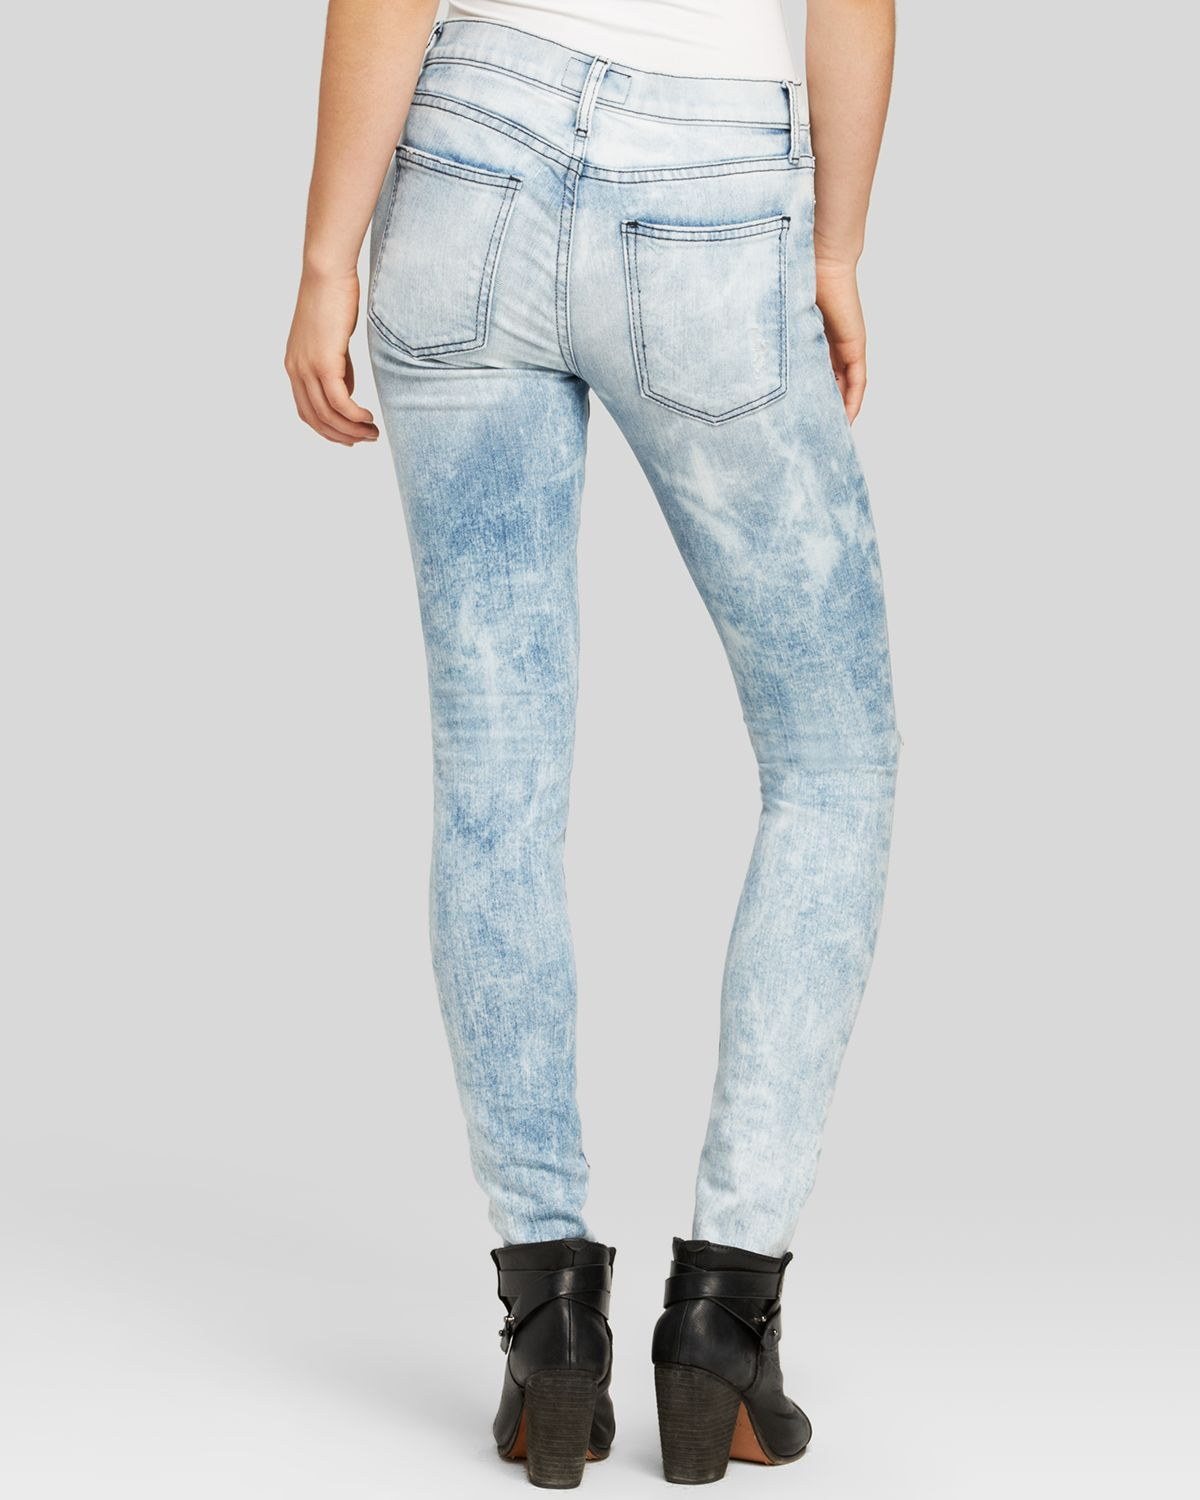 currentelliott-silver-jeans-the-ankle-skinny-in-city-bleach-destroy-product-1-26728475-2-484015035-normal.jpeg